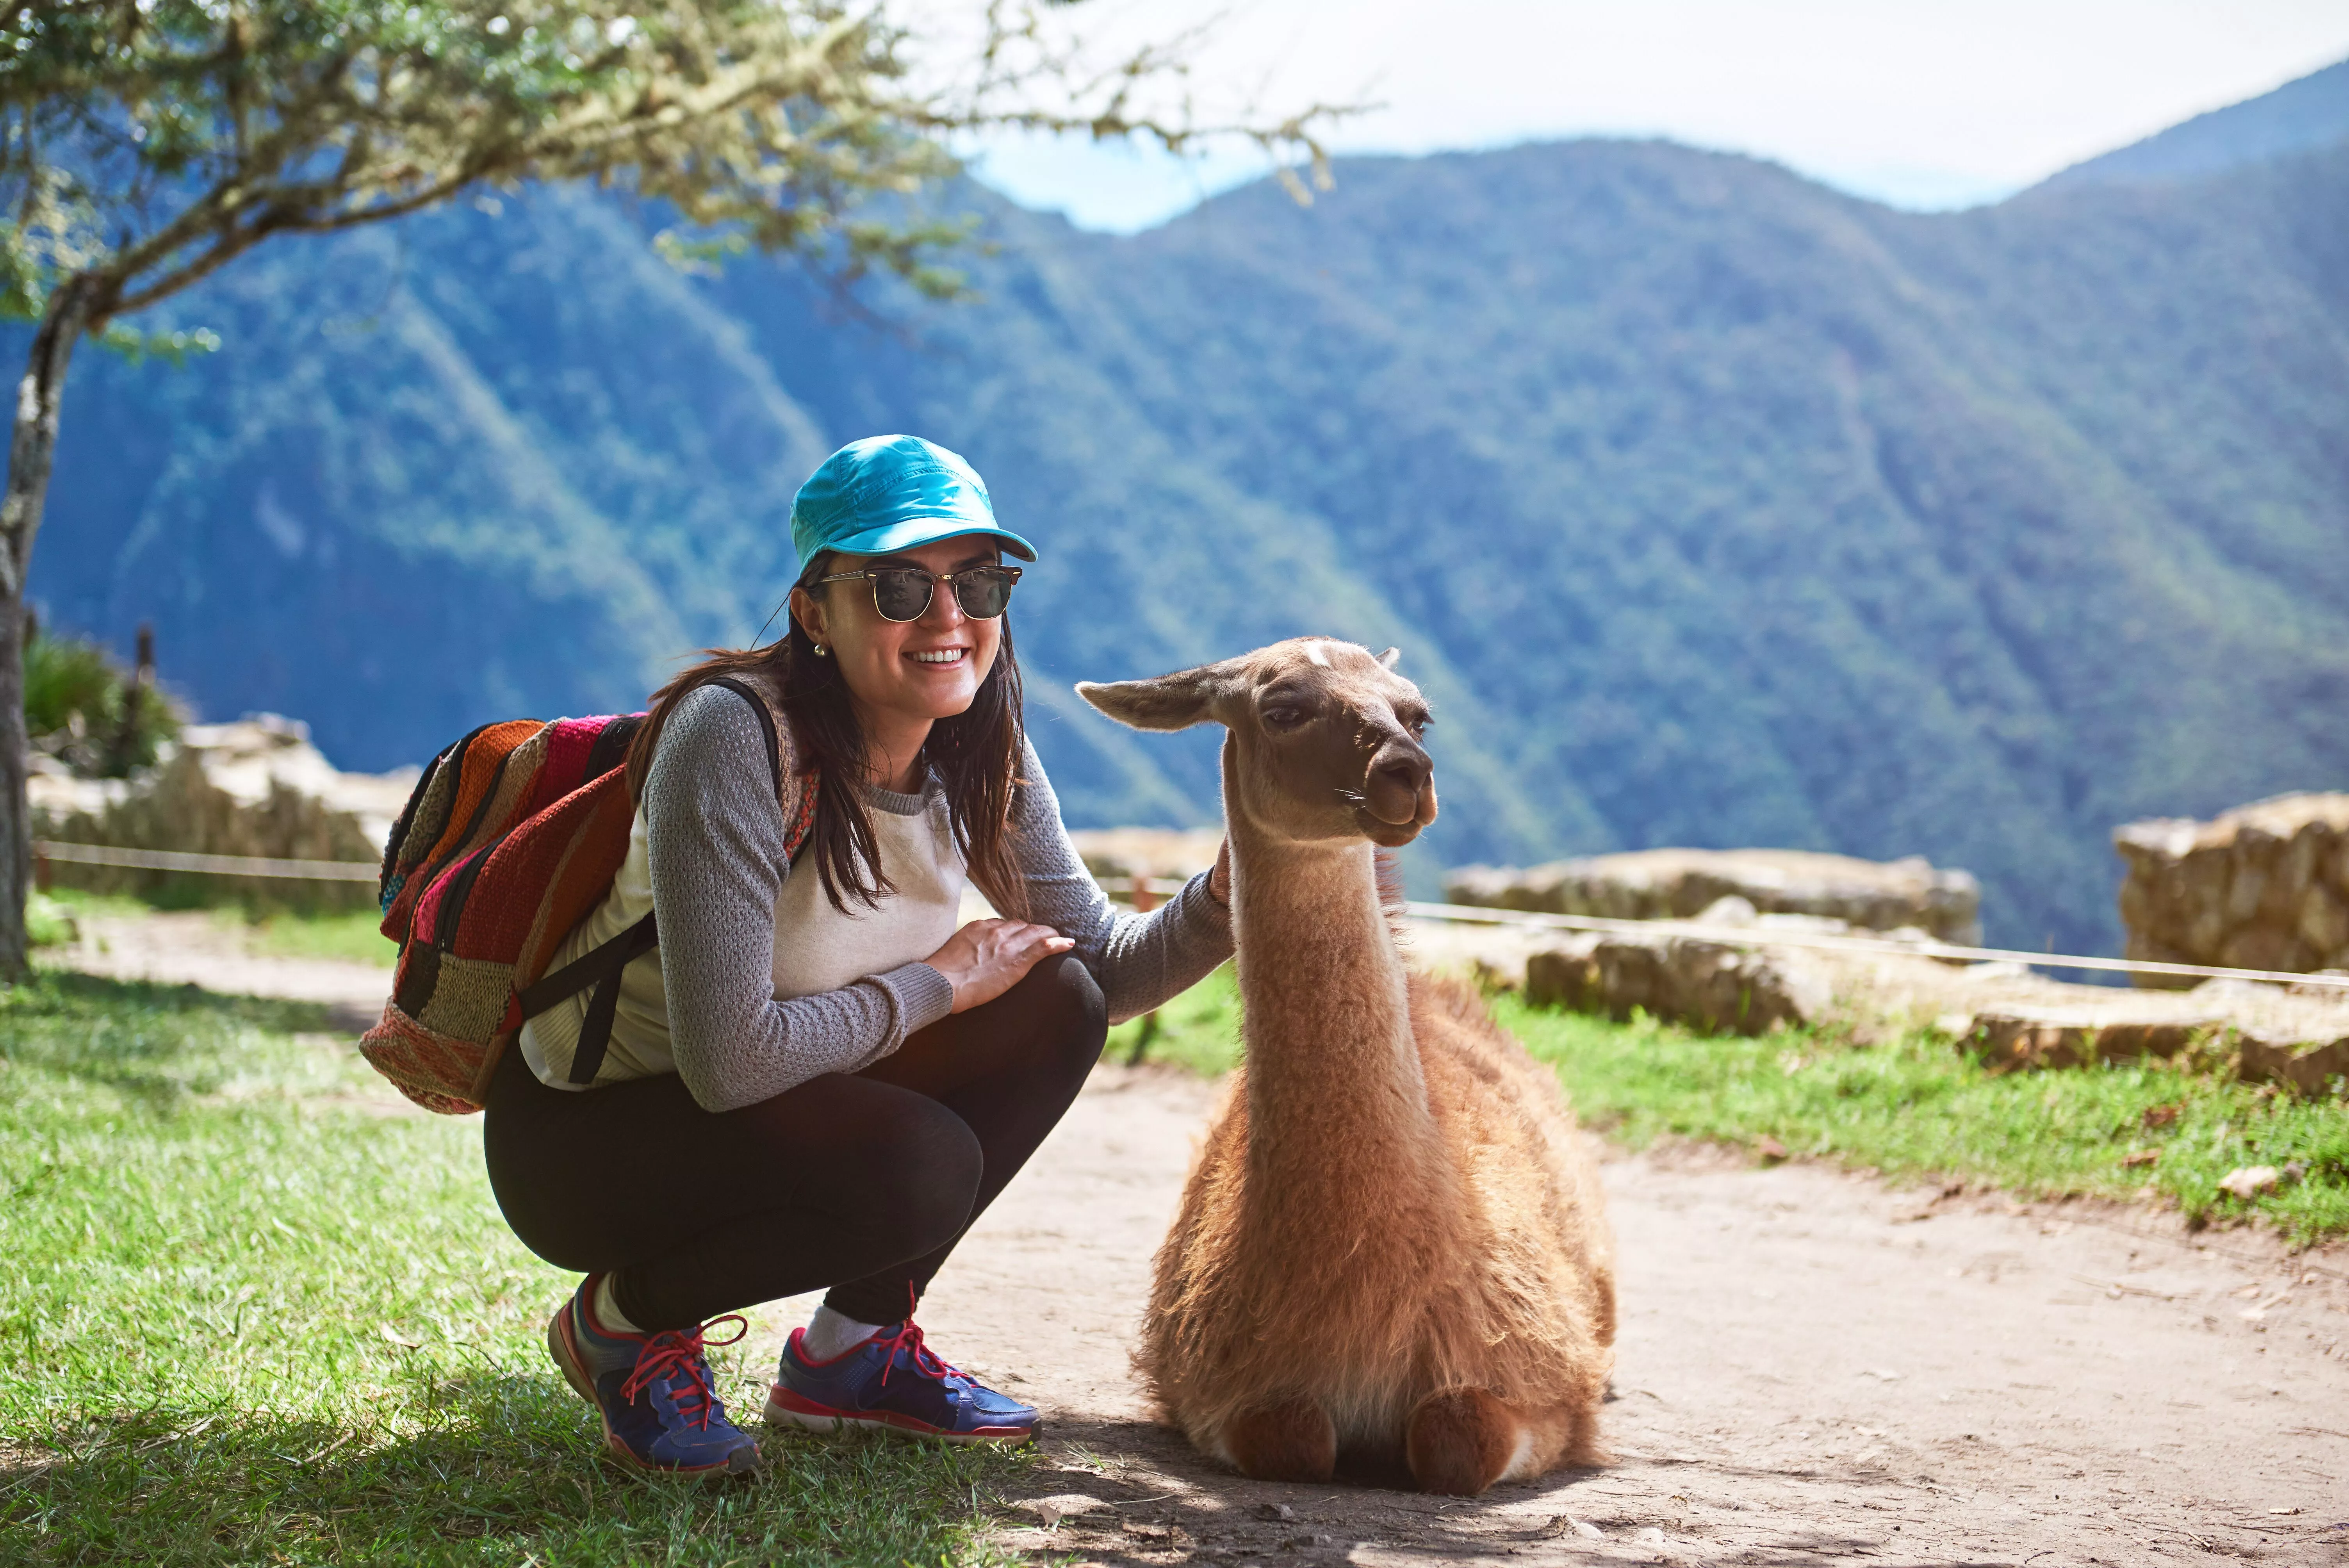 A stock photo of a classic llama with a young woman on a trail